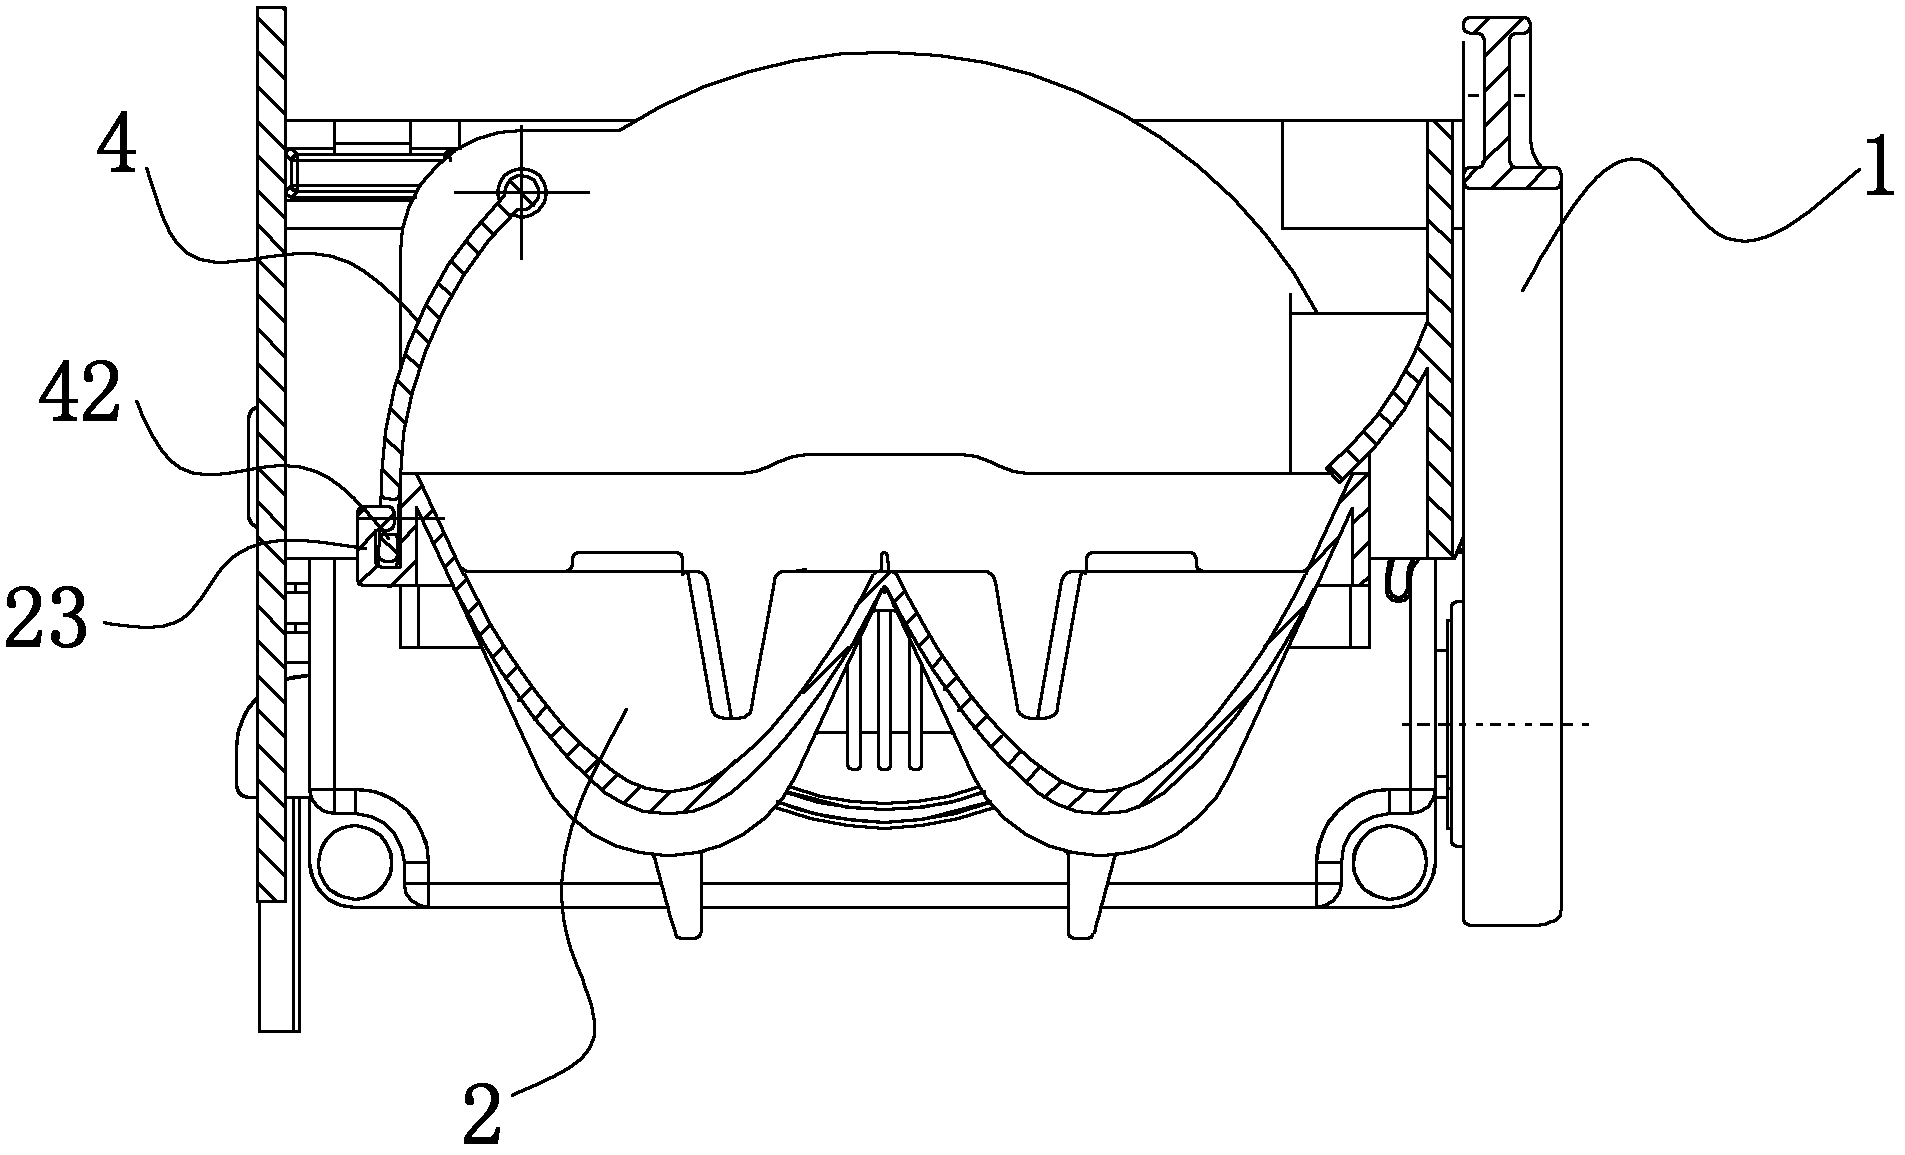 Ice machine and refrigerator provided with same